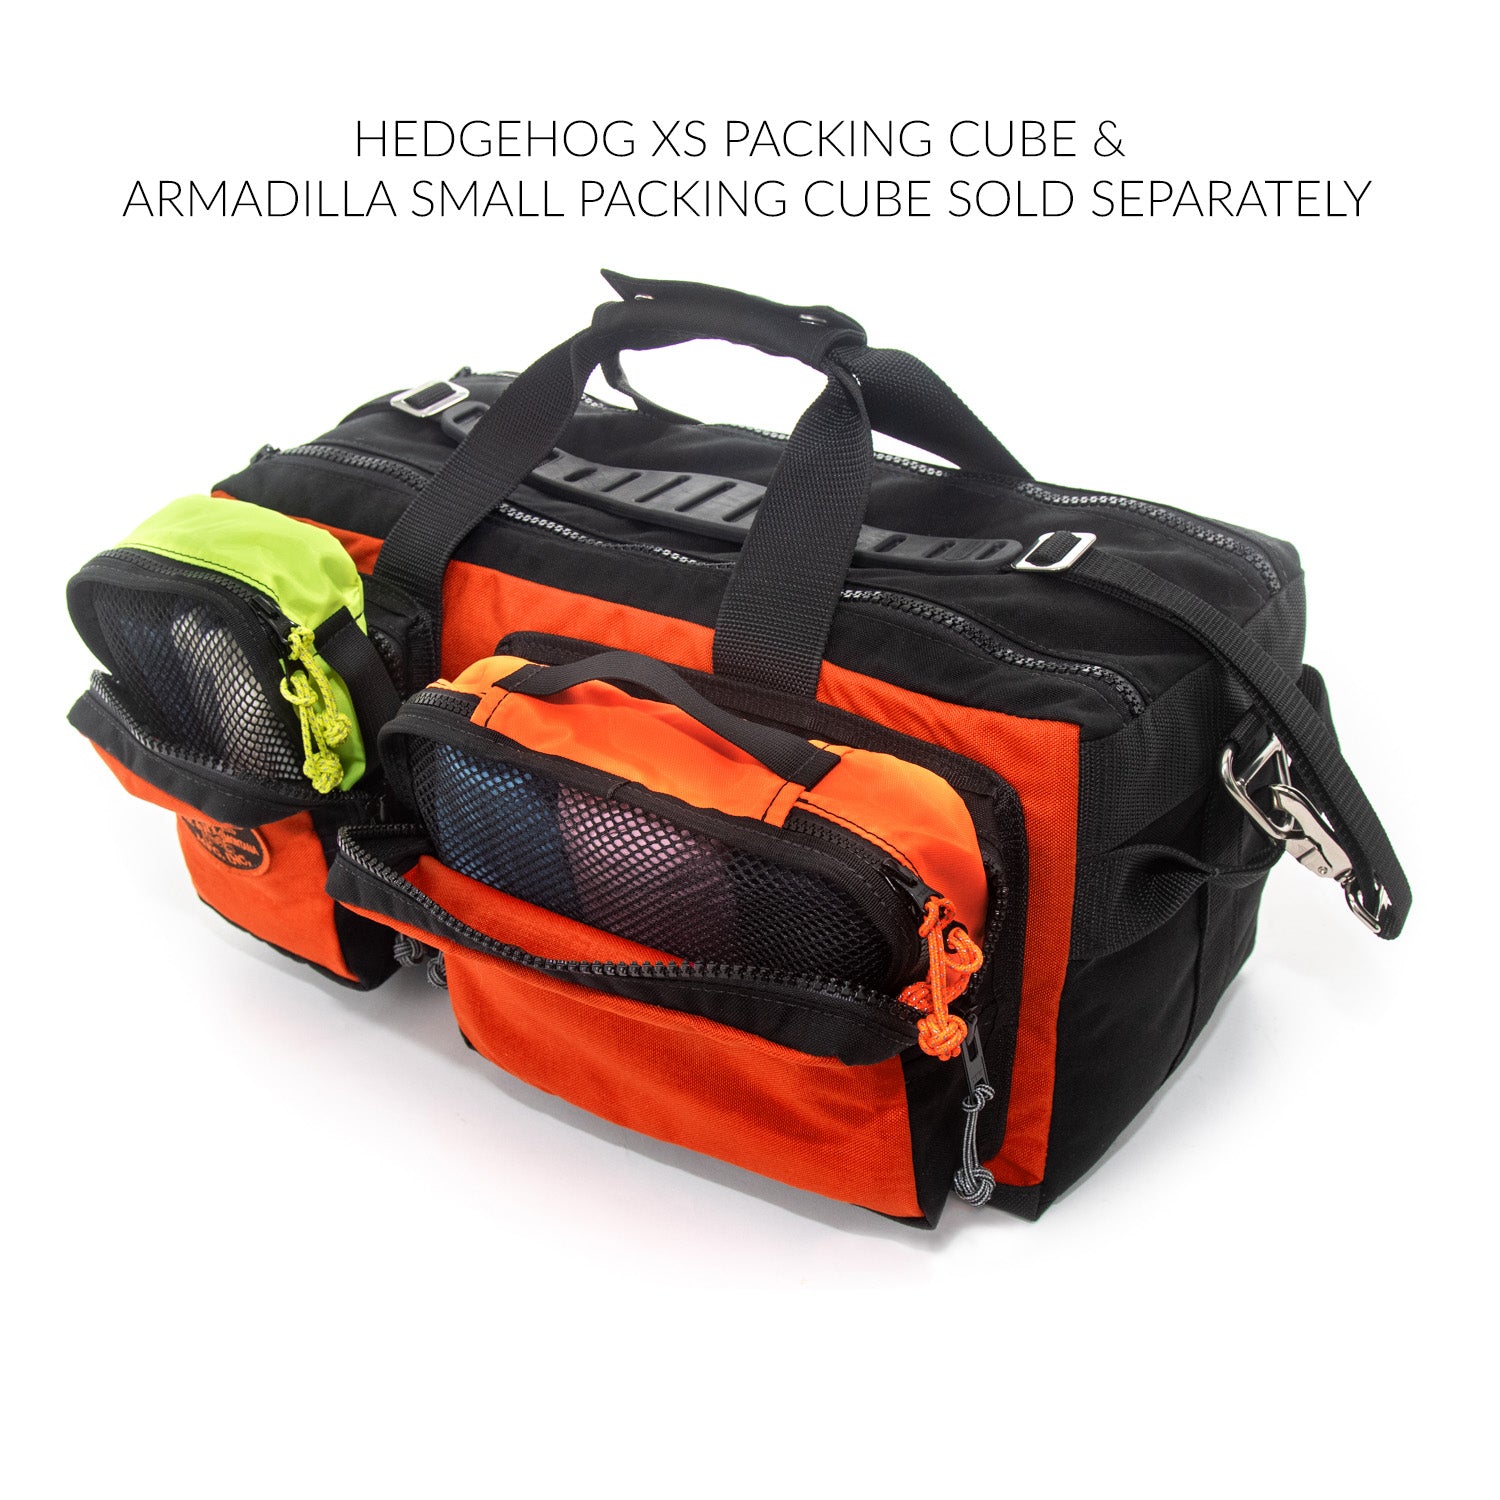 Hedgehog XS packing cube & Armadilla small packing cube sold separately.